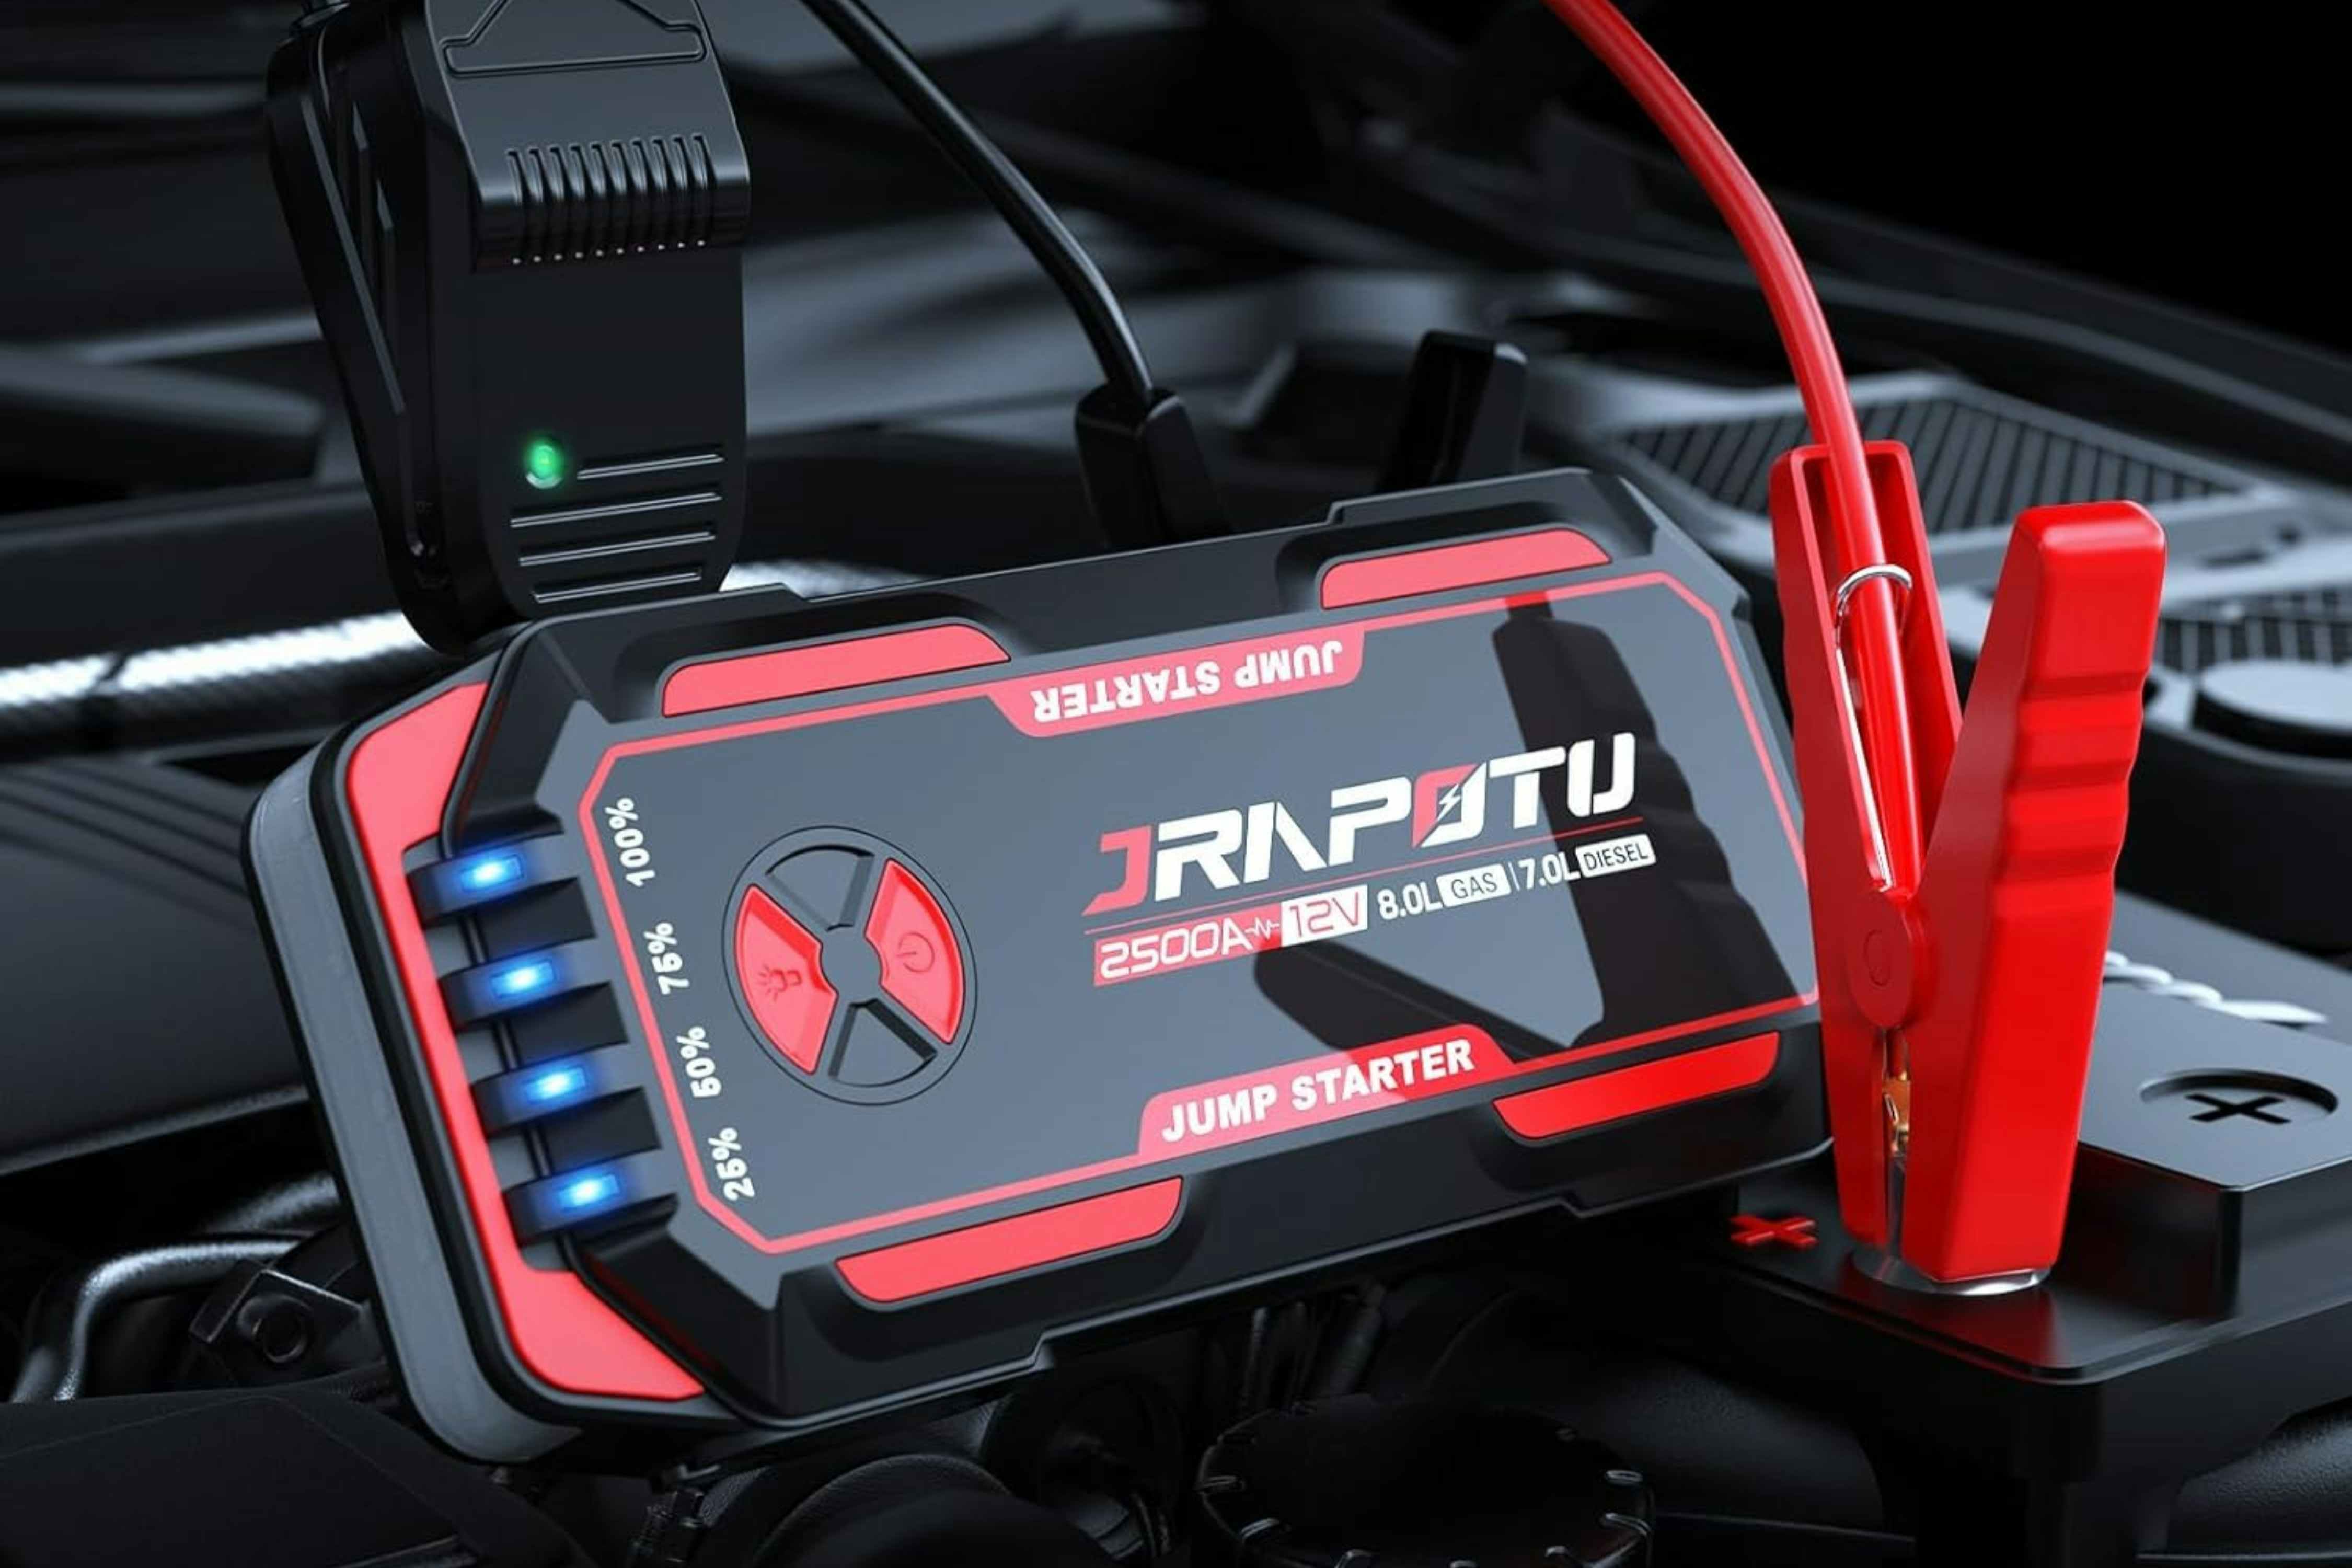 Portable Car Jump Starter, Just $39.95 With 50% Off Promo Code on Amazon